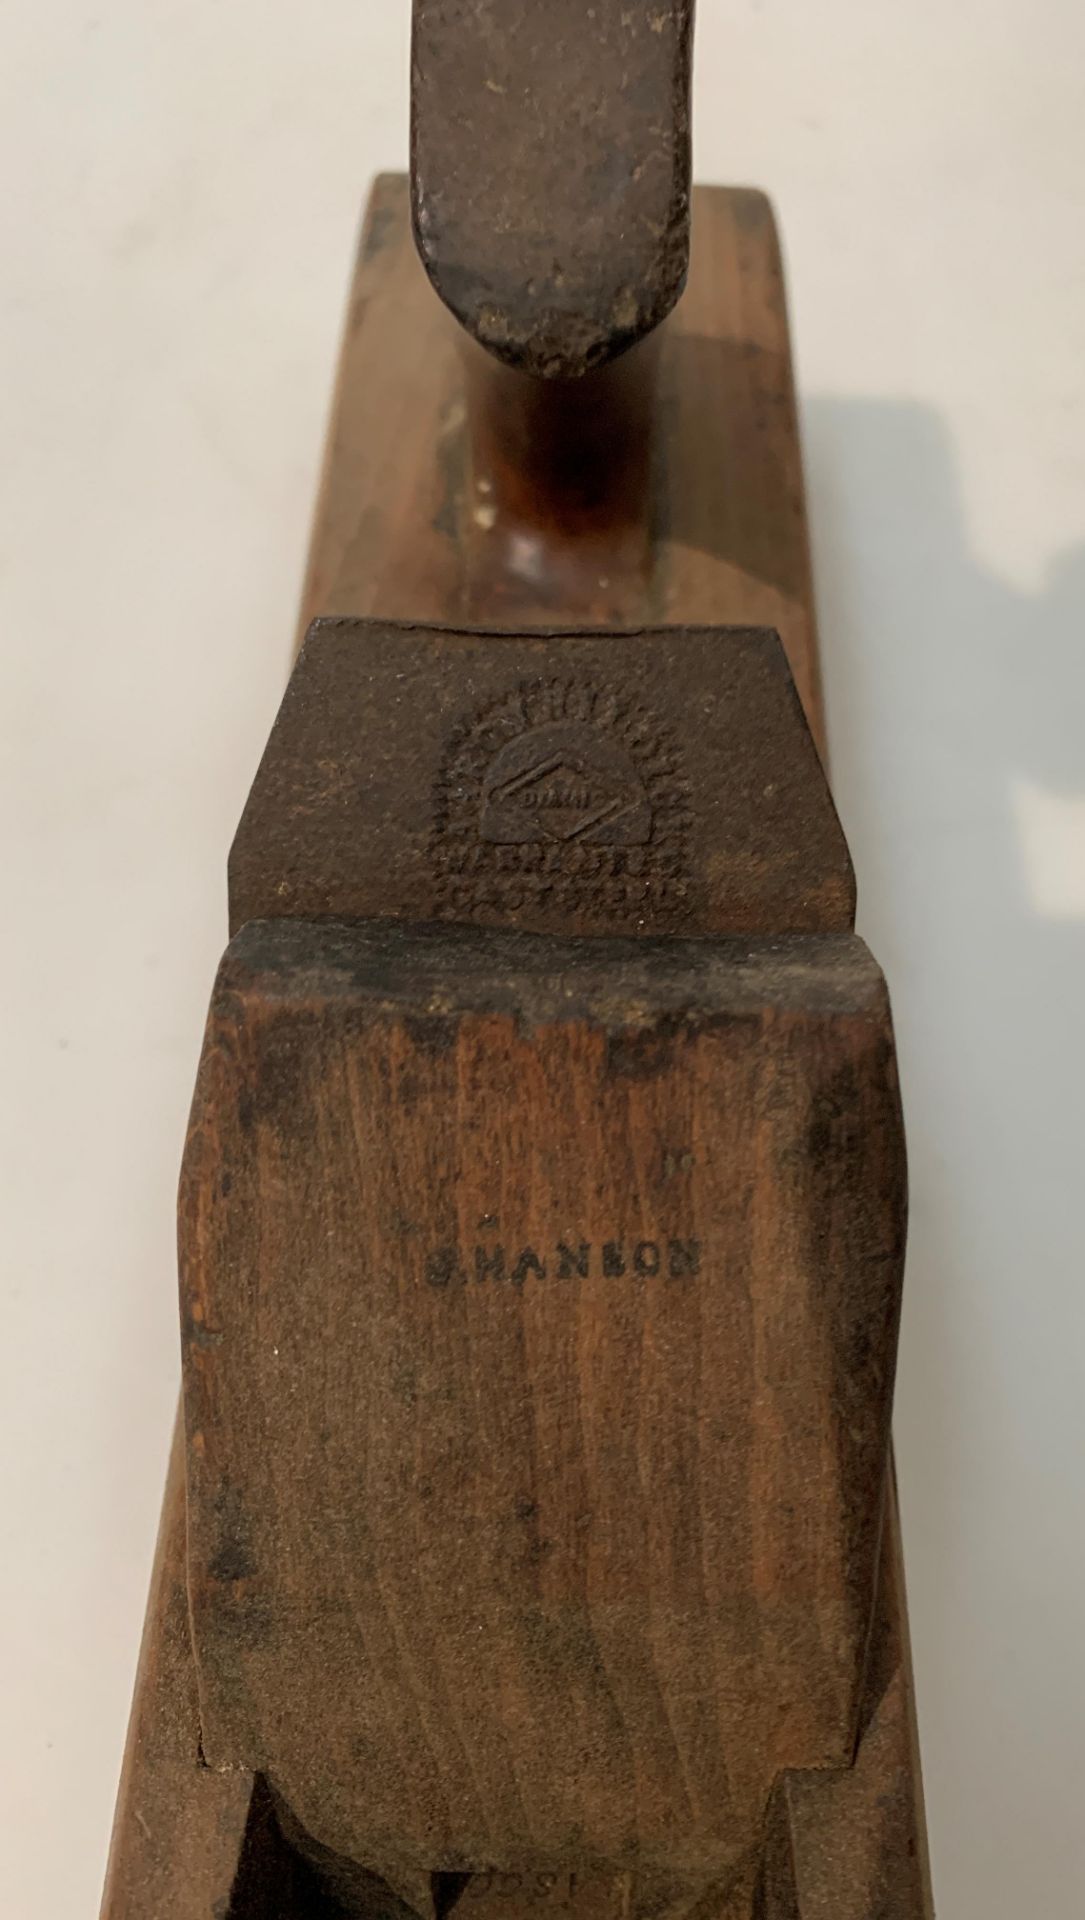 Large wood block/jointing plane blade stamped Aaron Hilditch Warranted, - Image 2 of 3